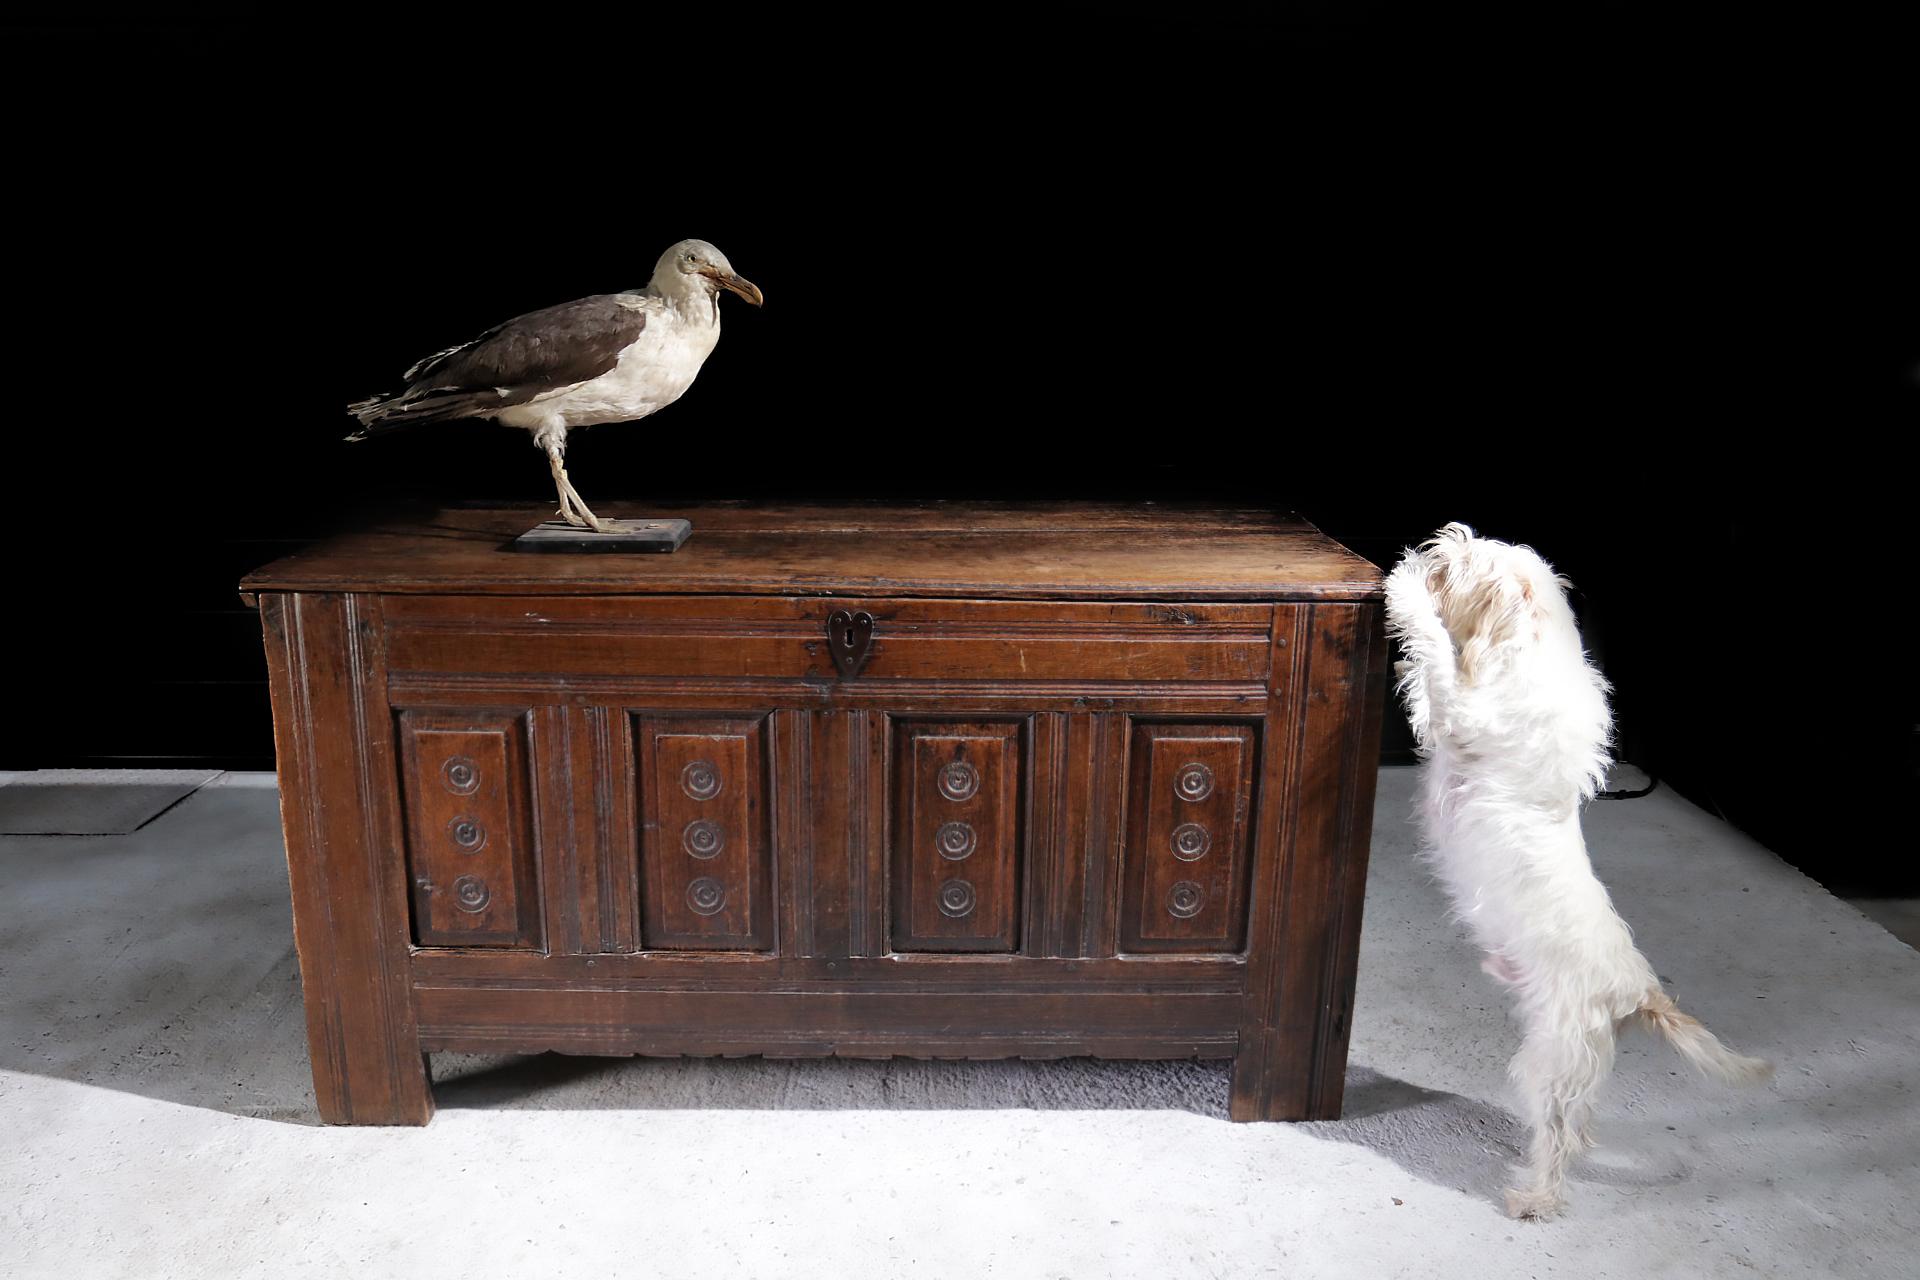 Wonderful oak chest from the 17th century.
Superb patina, created over the centuries.
The box on the right of the interior has a double bottom what were they hiding here?
The box is completely original except for the lock and the lock plate,